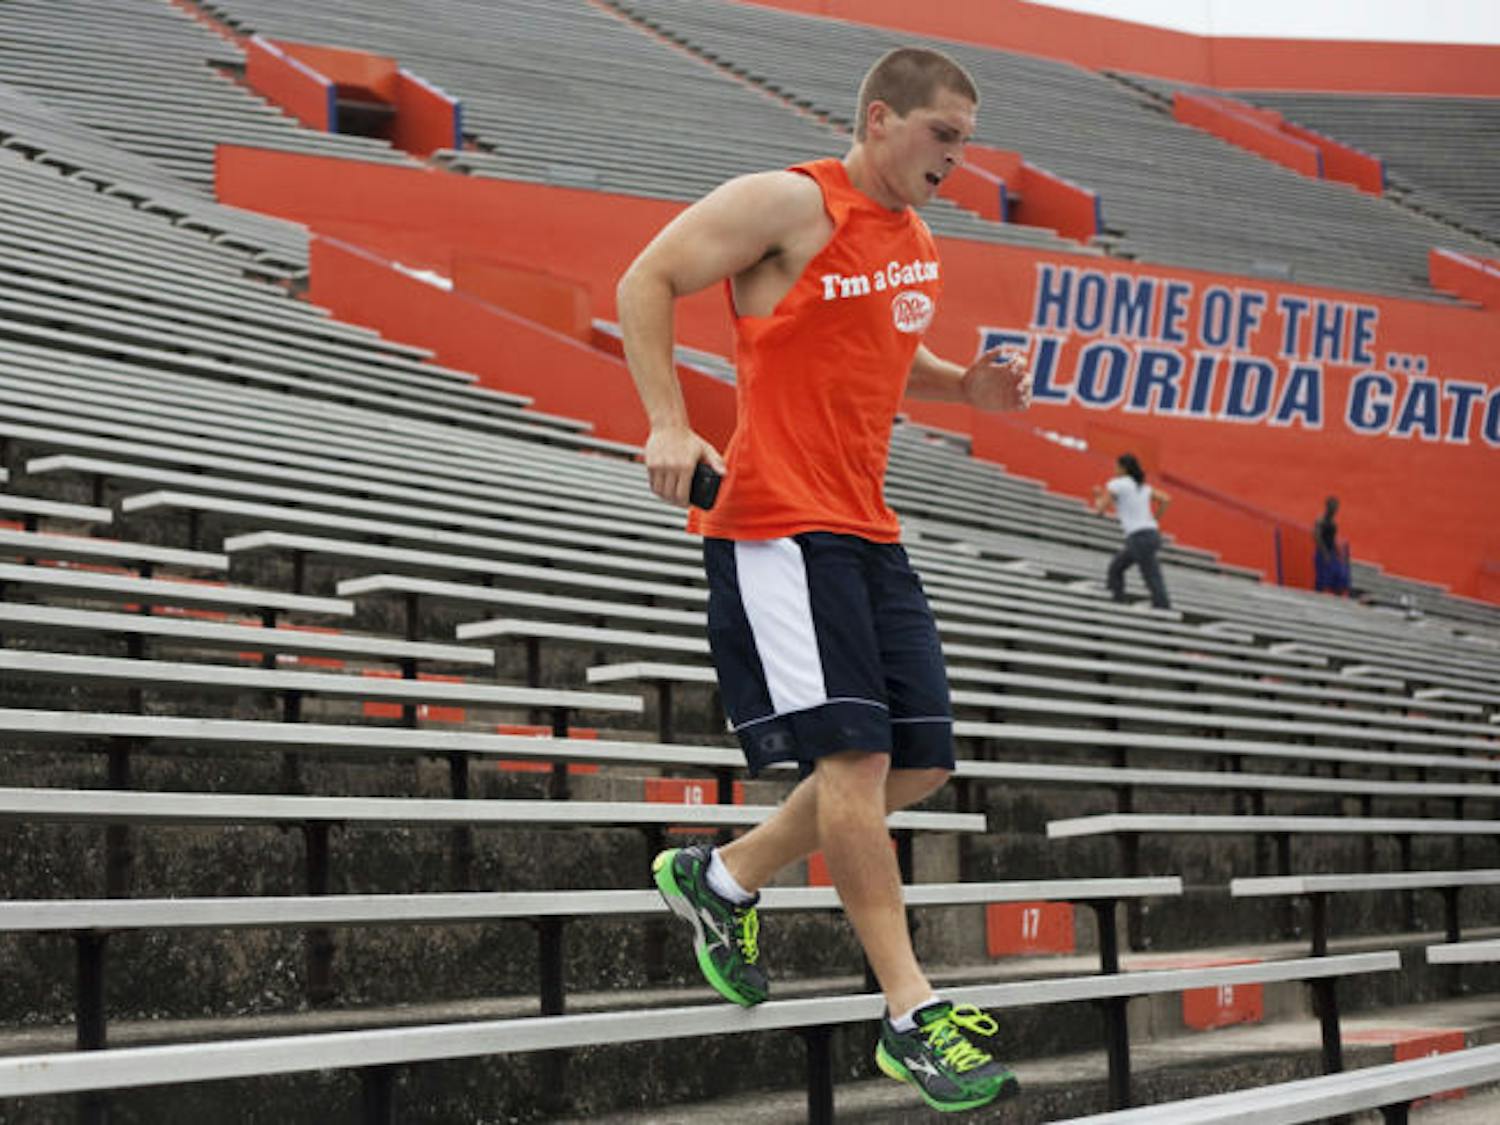 UF engineering freshman Joe Liccini, 19, exercises at Ben Hill Griffin Stadium on Monday. According to a study, walking can lower people’s risk of high blood pressure as much as running can.